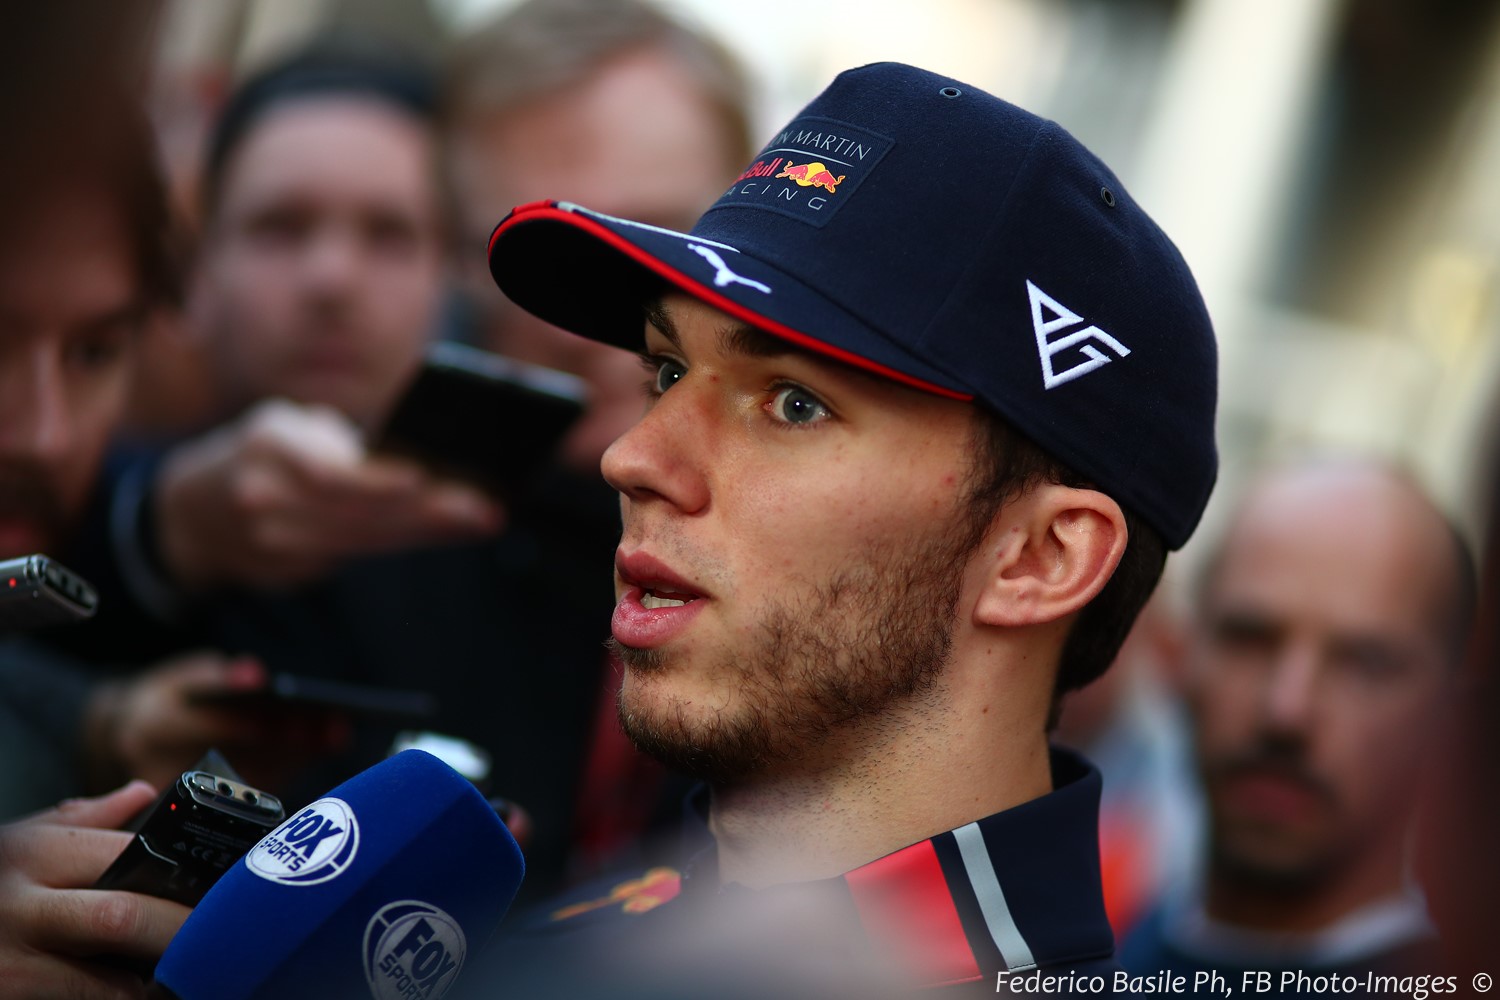 Pierre Gasly's being destroyed in a similar way to how Marc Marquez is destroying his MotoGP teammate Jorge Lorenzo - complete domination